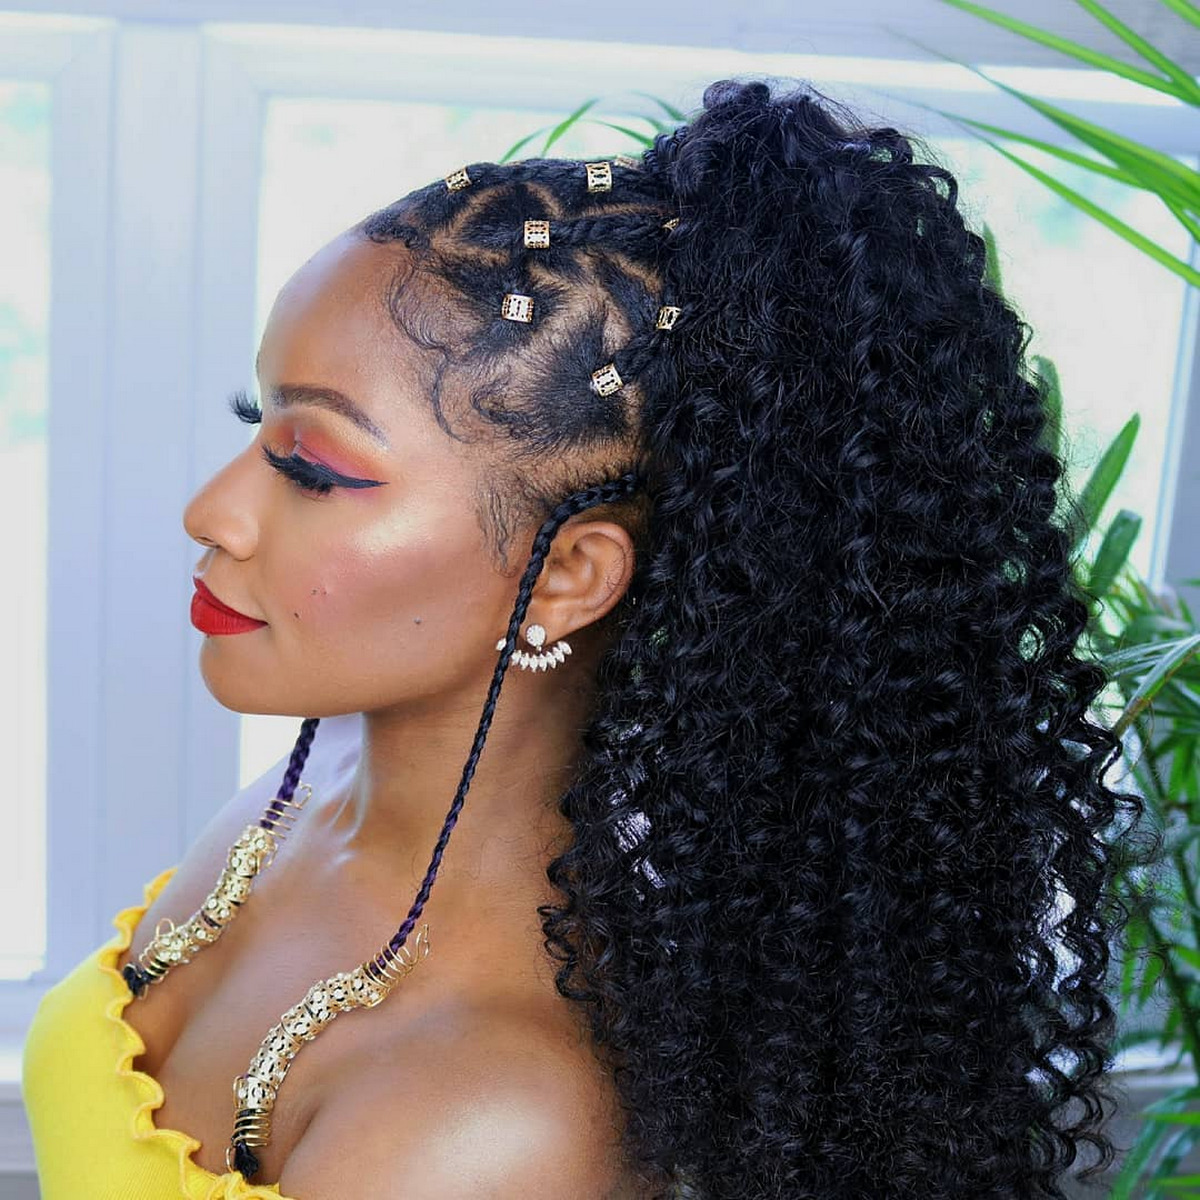 Best Ponytail Hairstyles with Weave Ideas - Curly Girl Swag